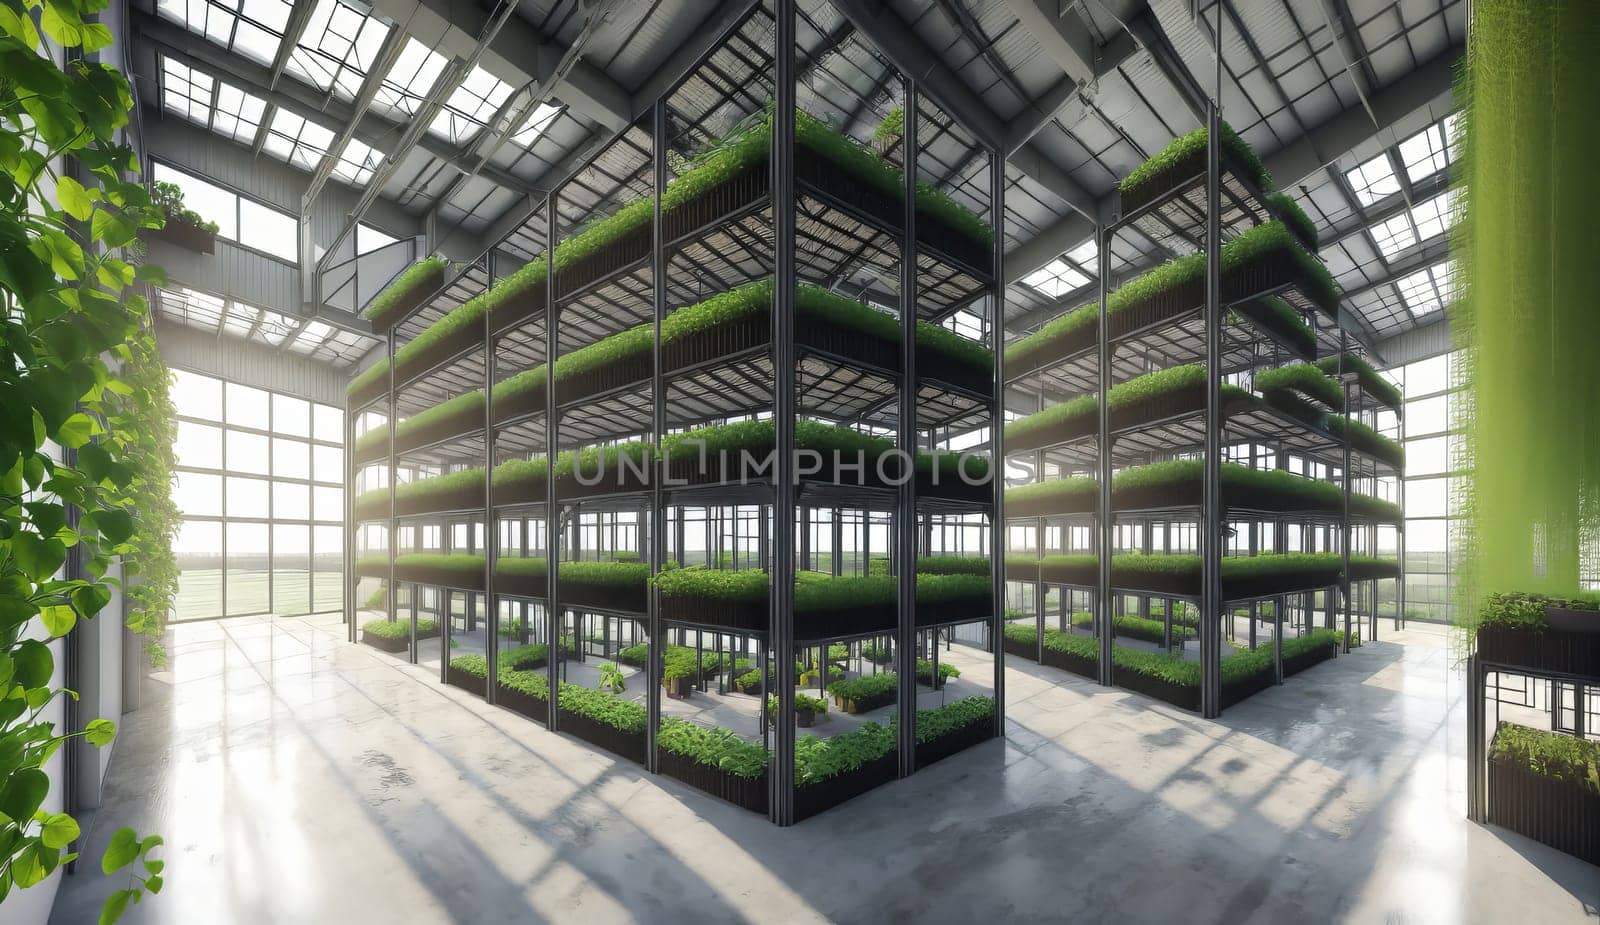 Building with glass facade filled with shelves of green terrestrial plants by DCStudio